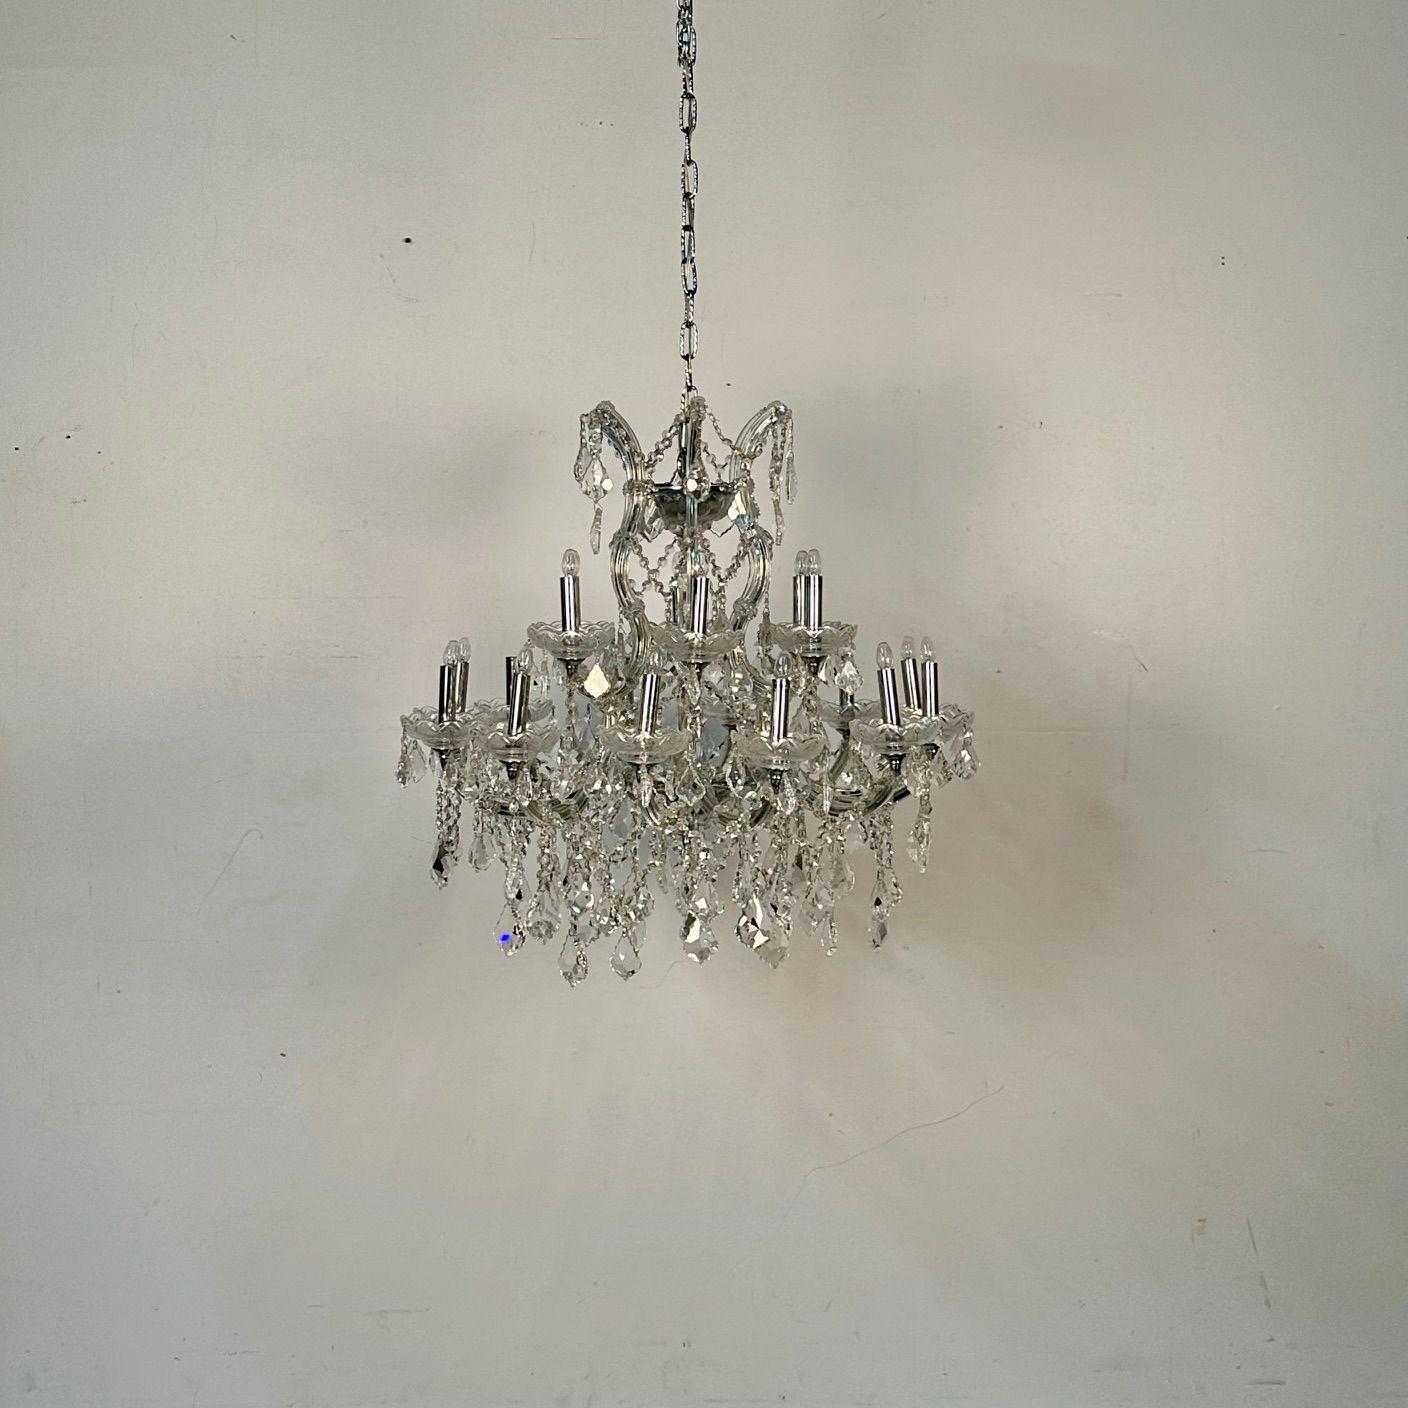 Venetian Style Crystal Chandelier, 19 Light In Good Condition For Sale In Stamford, CT